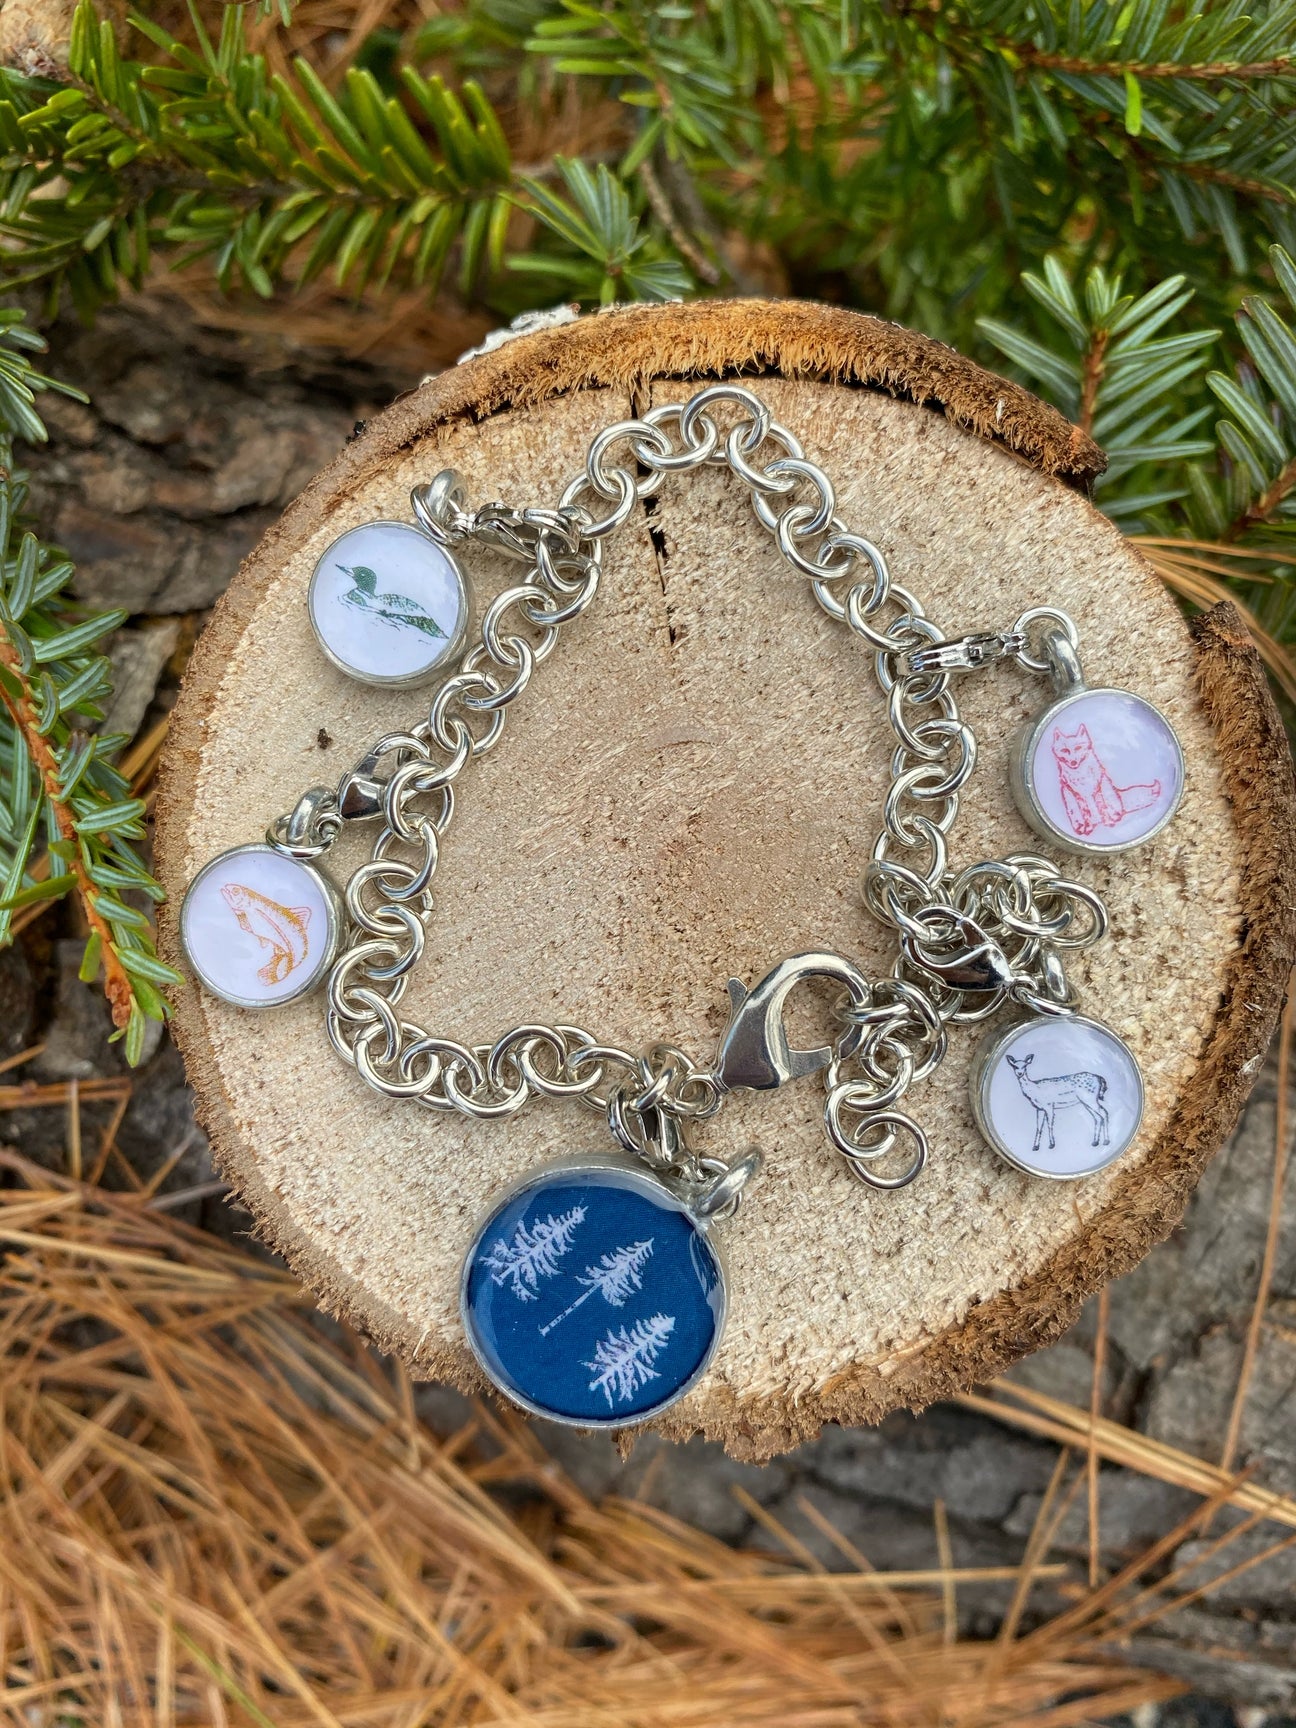 The Woods Maine x CHART Metalworks Charm Bracelet Inspired by the Maine Outdoors